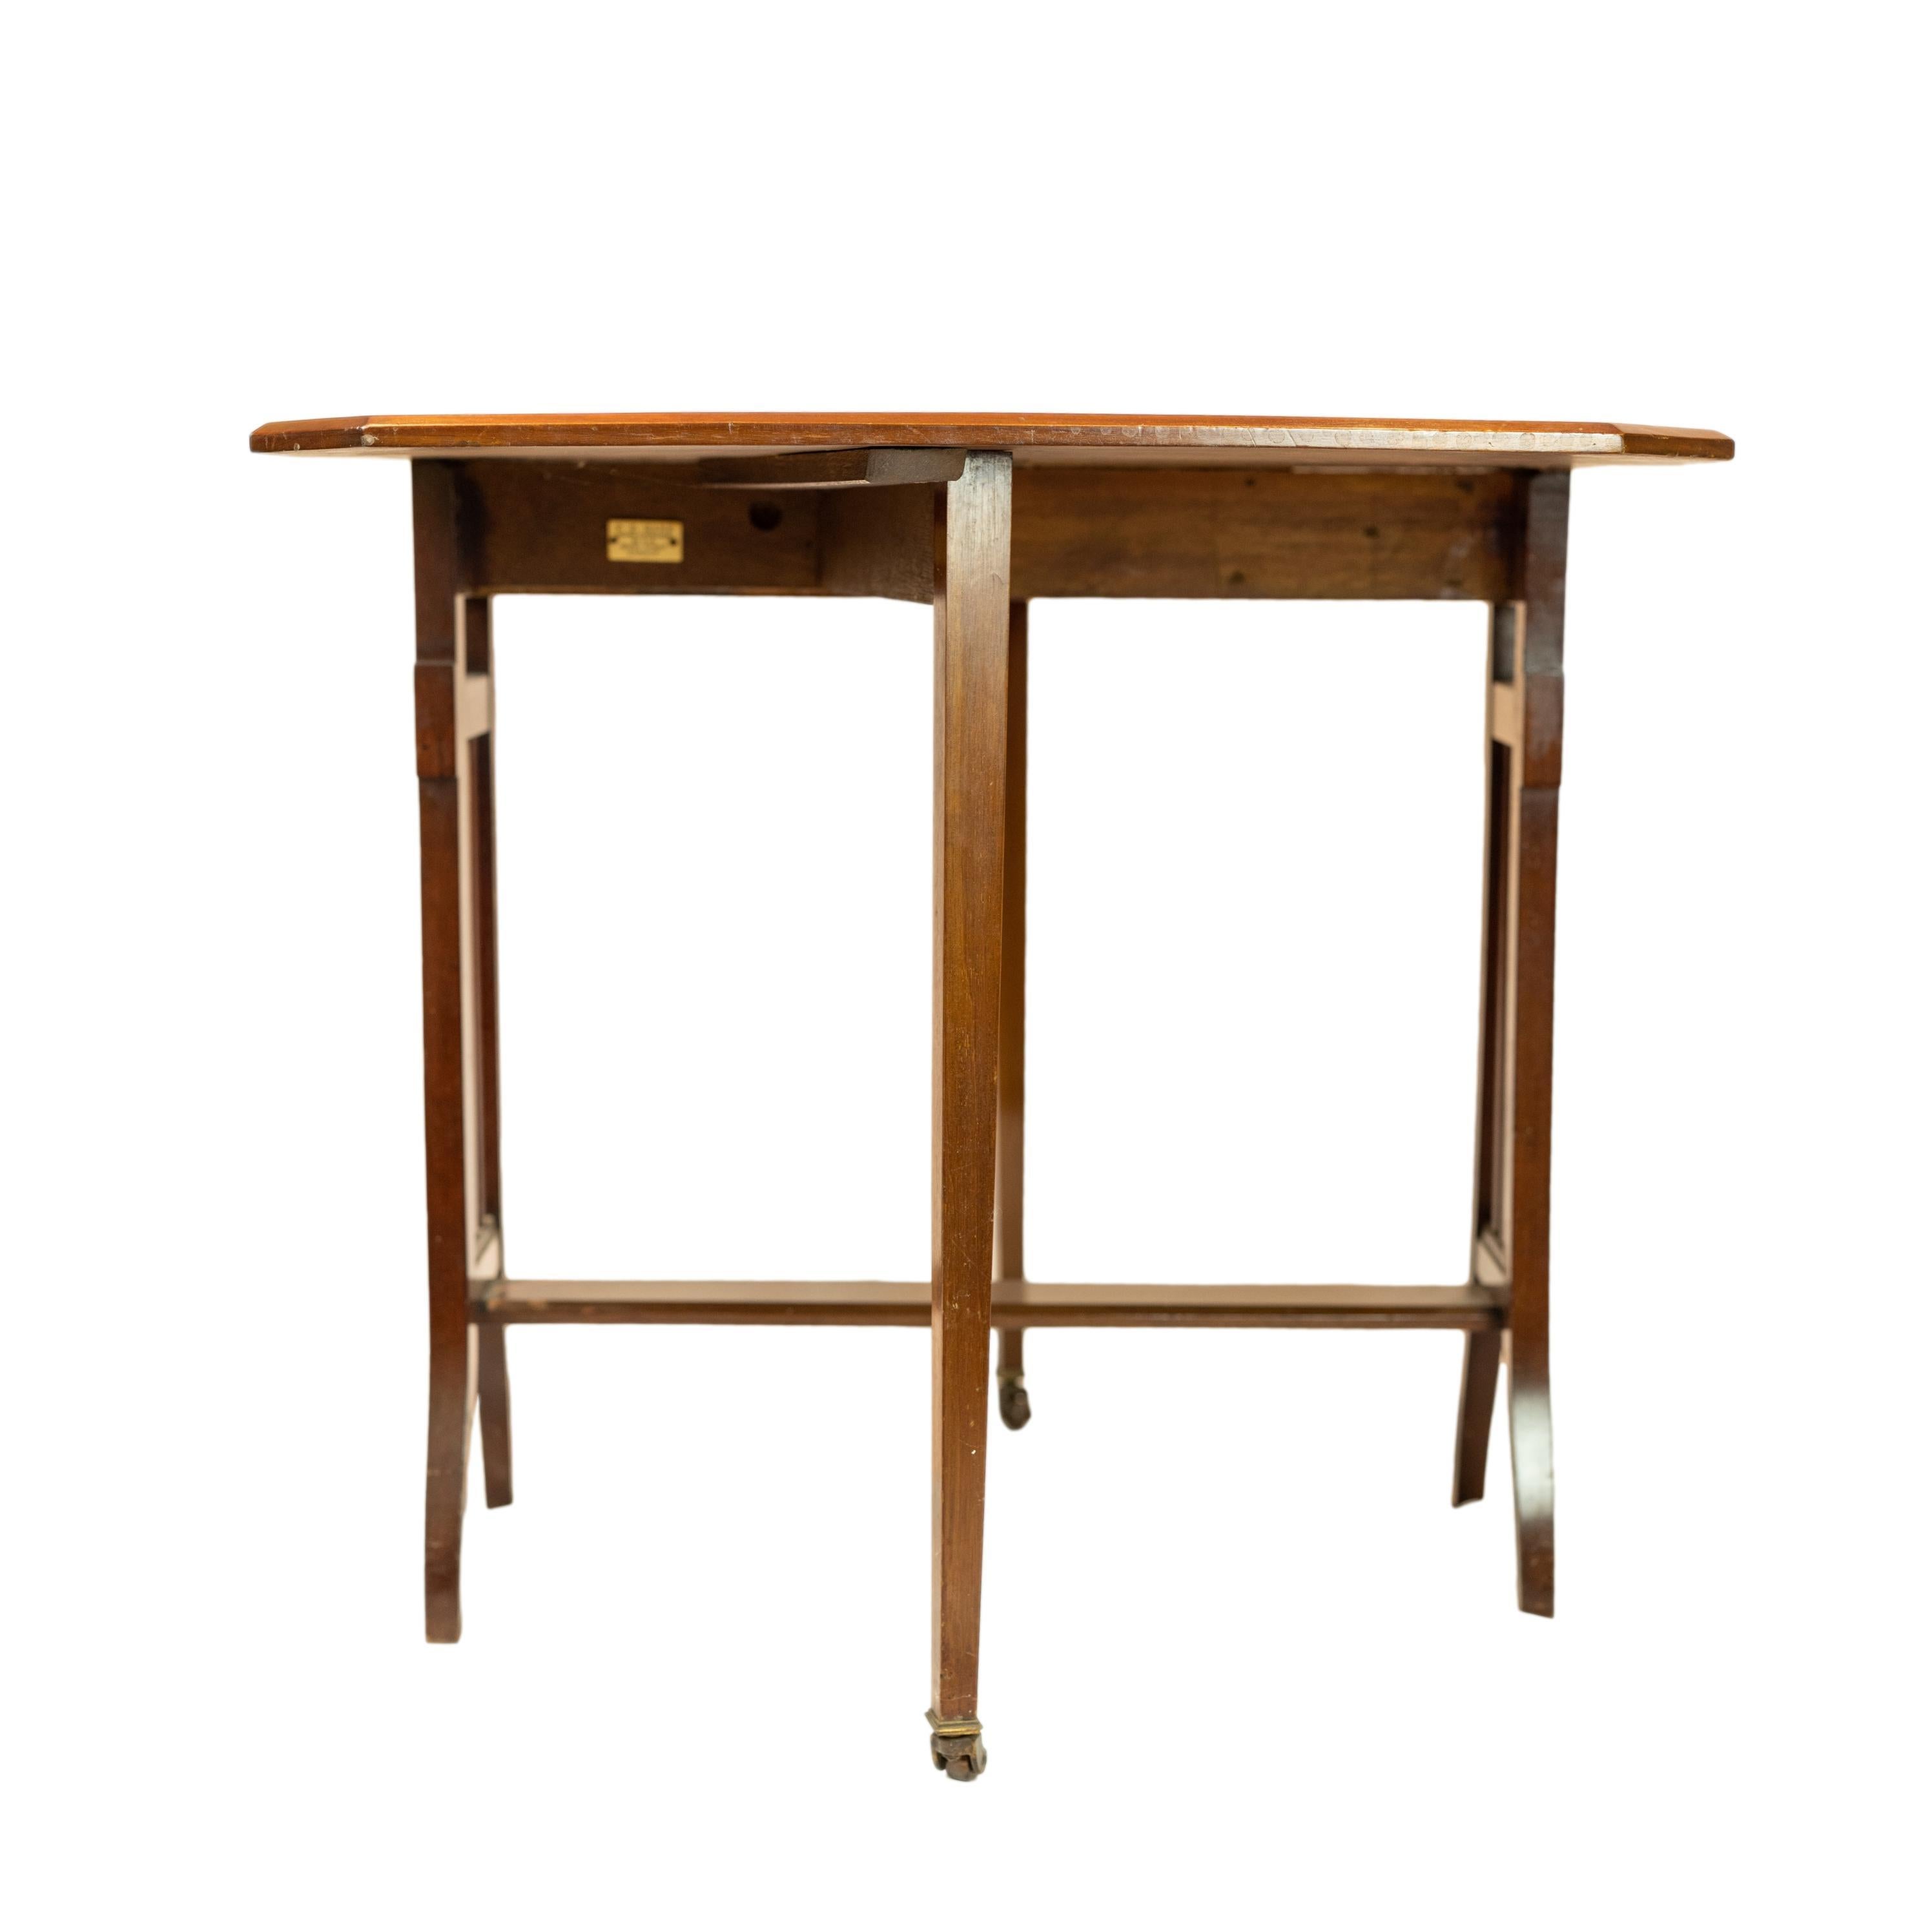 Hand-Crafted Arts & Crafts Mahogany Drop-Leaf Sutherland Table, Labeled, British, ca. 1900